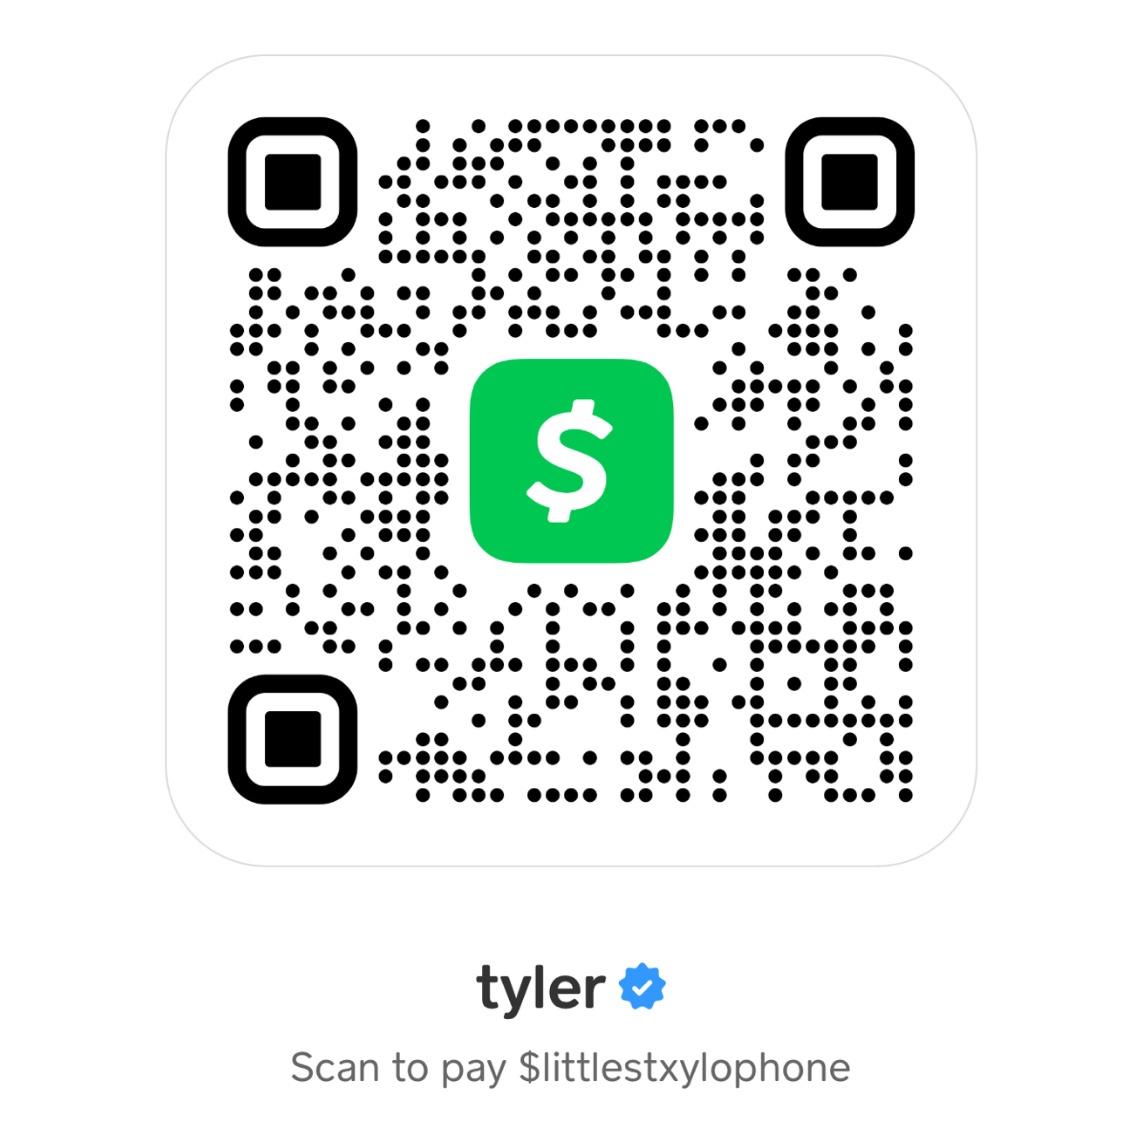 A QR Code of my cash app account, which can alternately be accessed at this link: https://cash.app/$littlestxylophone